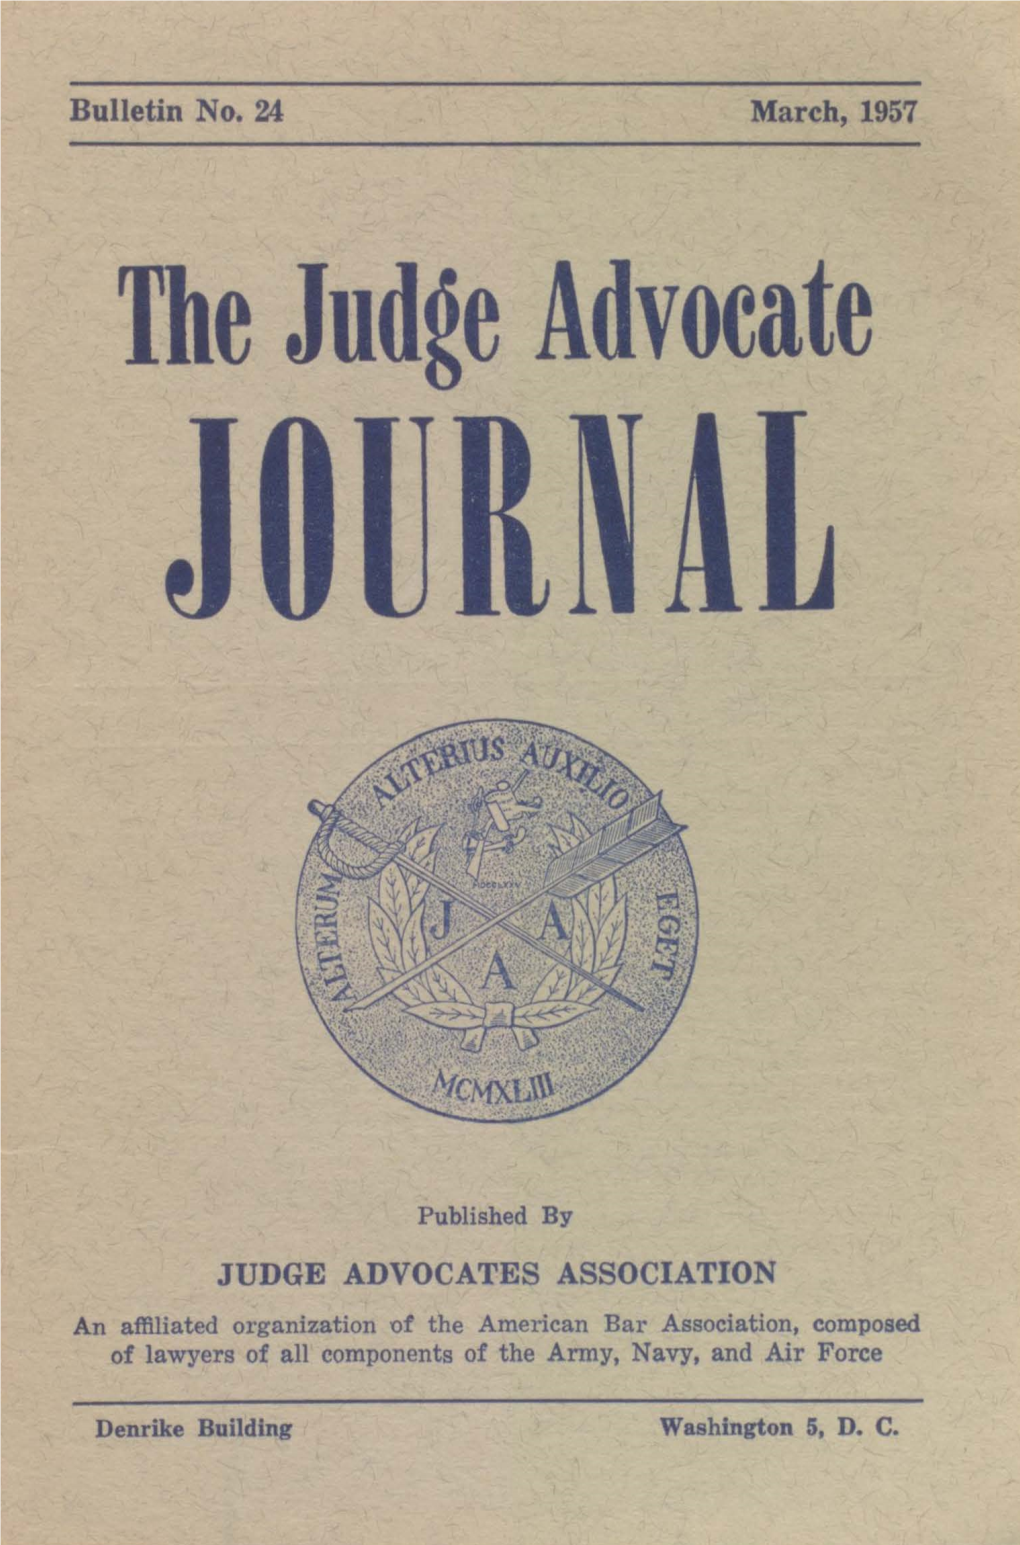 The Judge Advocate Journal, Bulletin No. 24, March, 1957